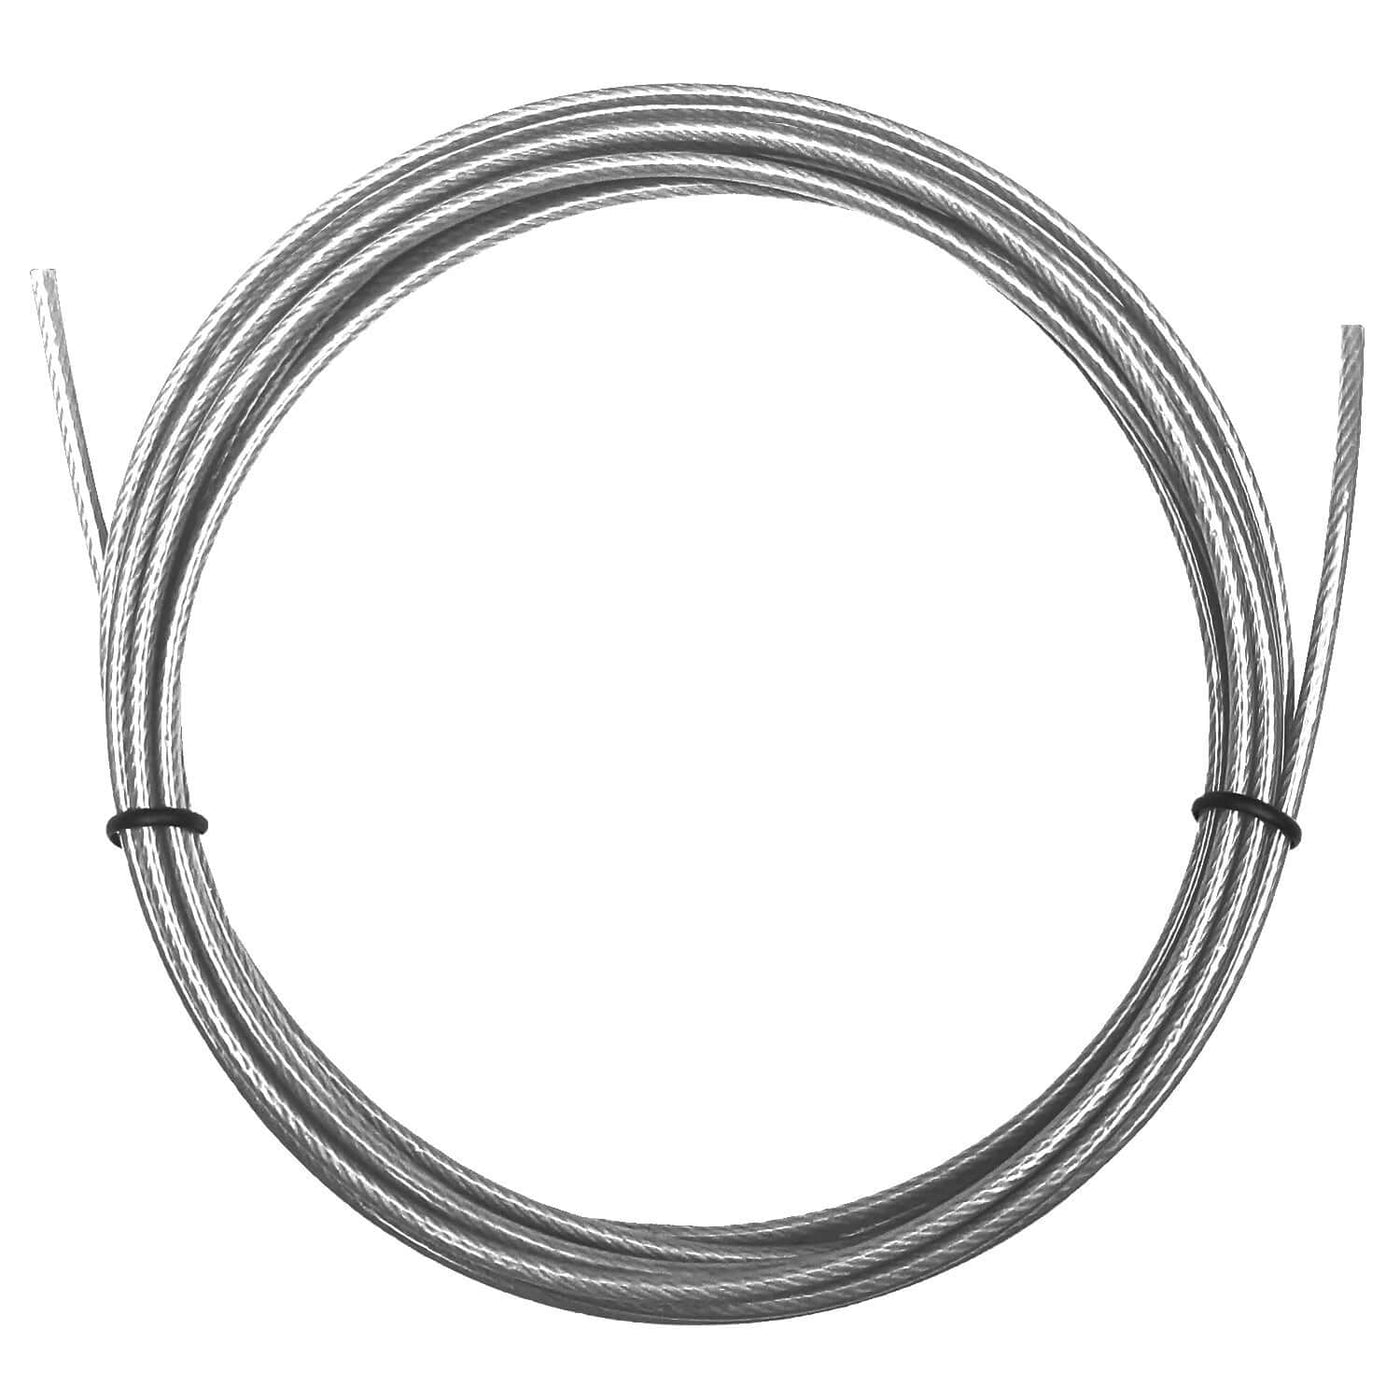 Murgs Replacement Skipping Rope Cable 2.5mm Silver